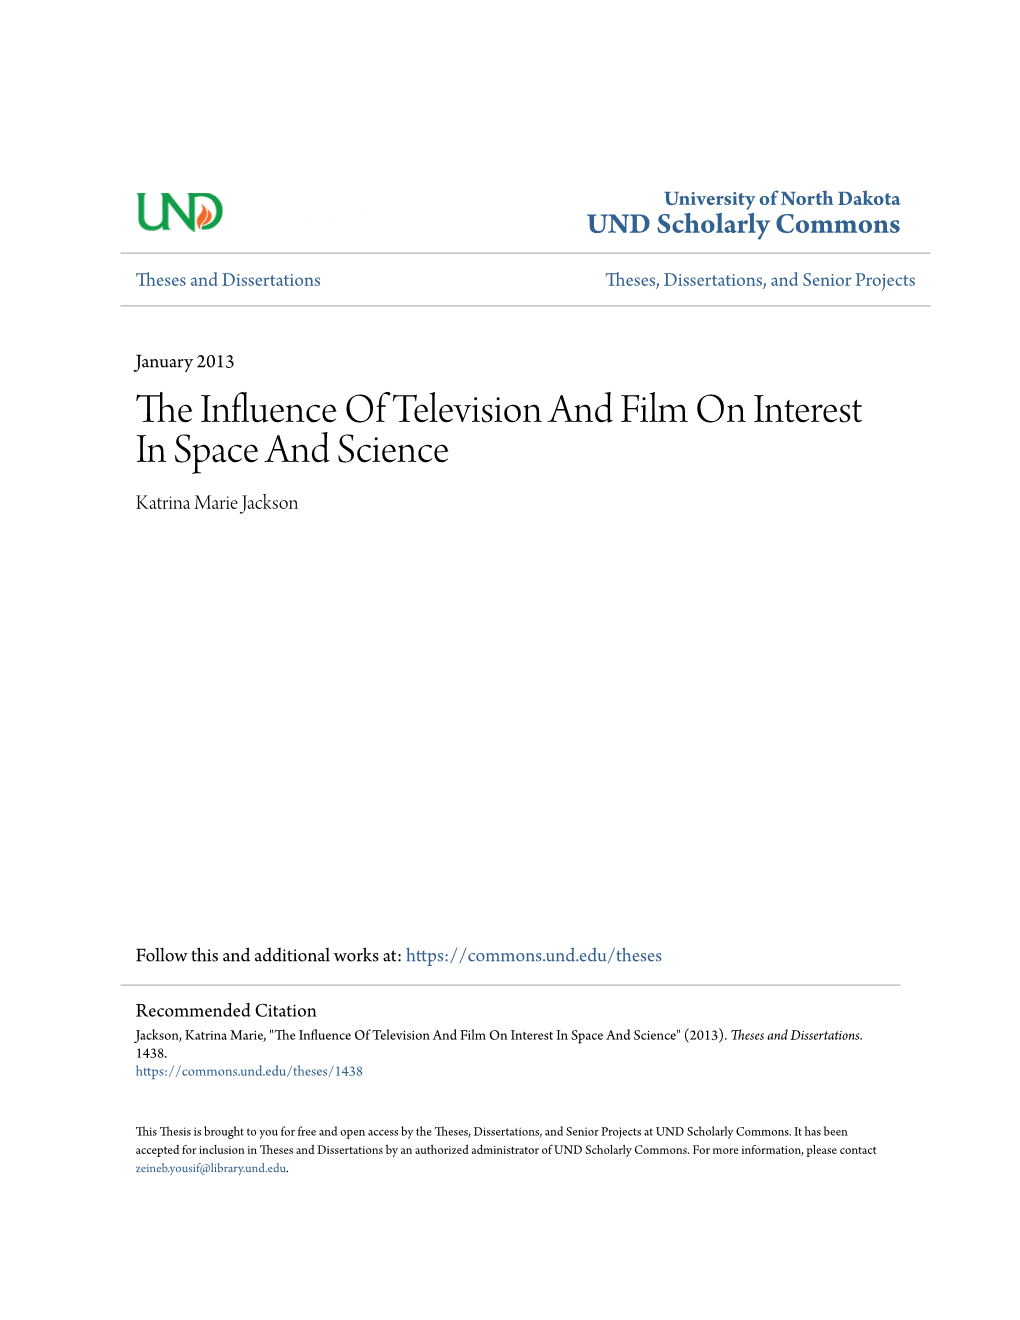 The Influence of Television and Film on Interest in Space and Science